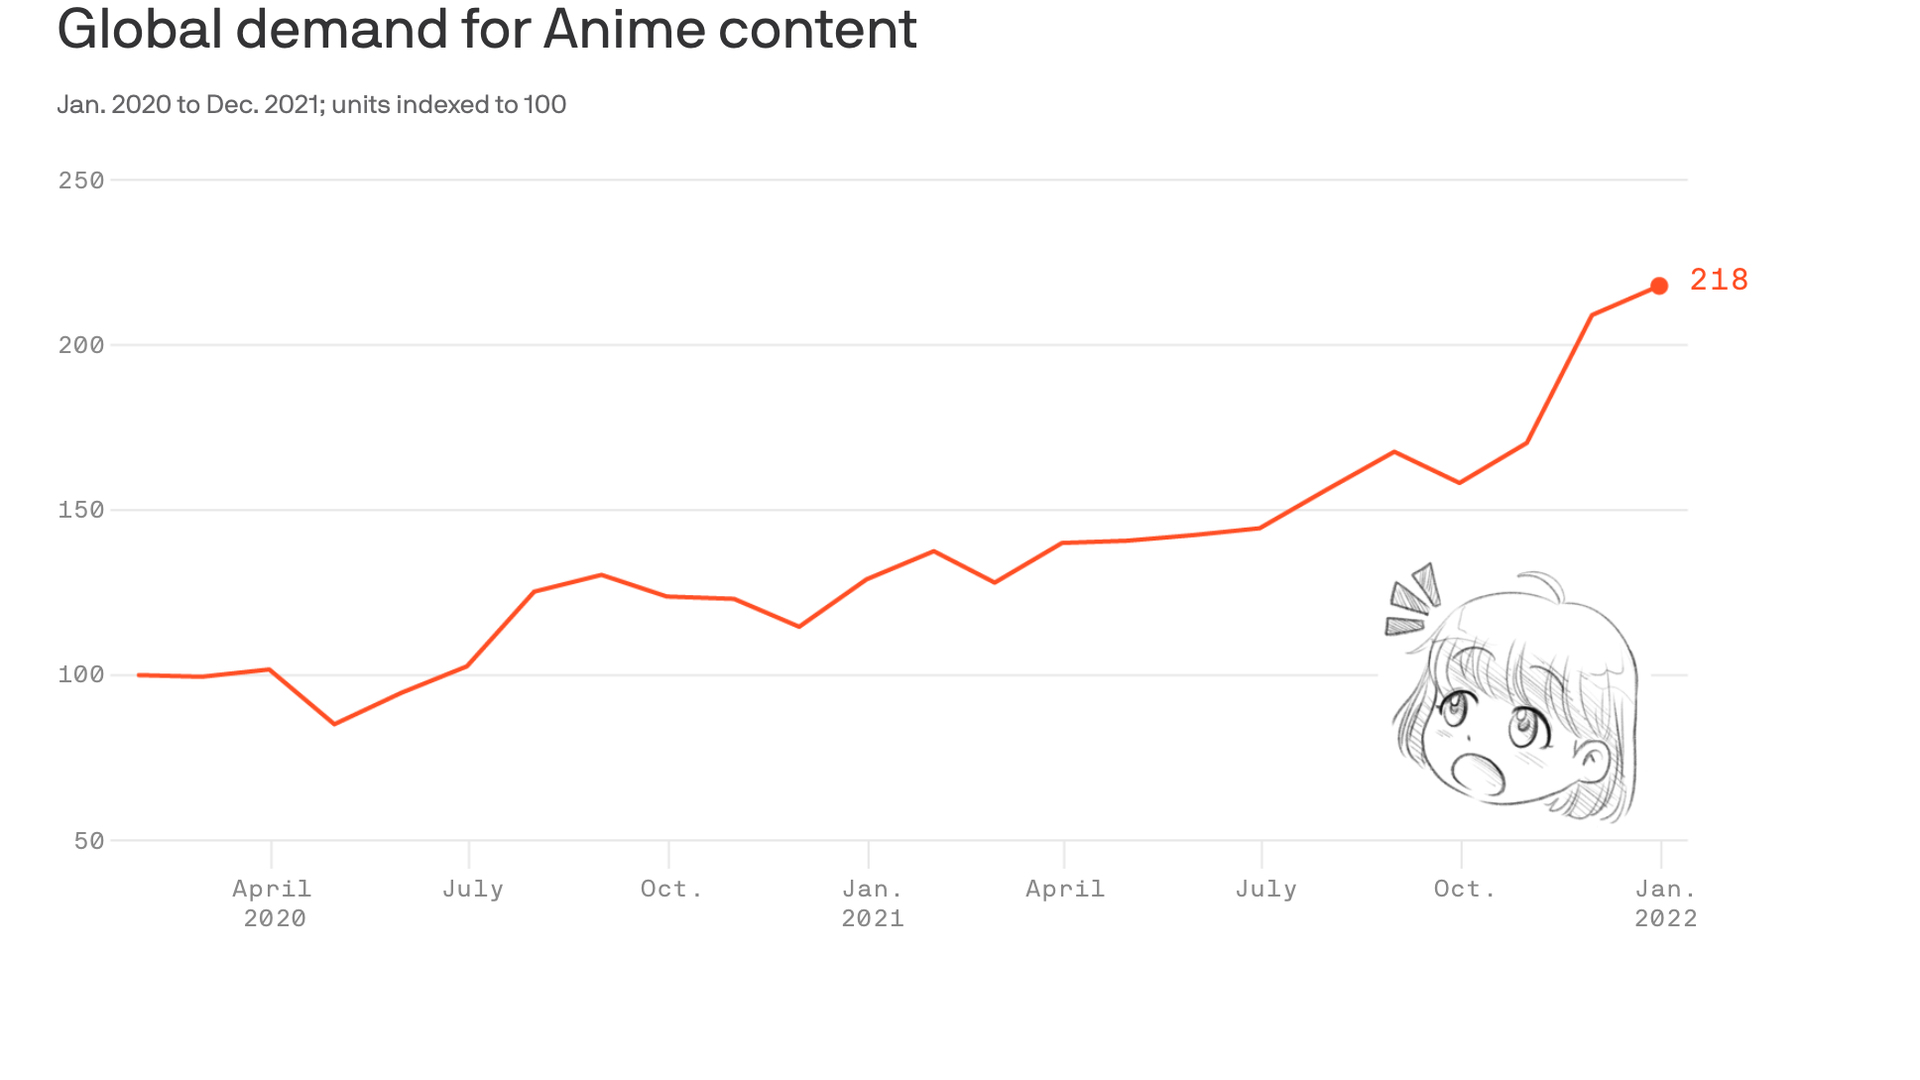 The number of anime available on Crunchyroll per country (2022